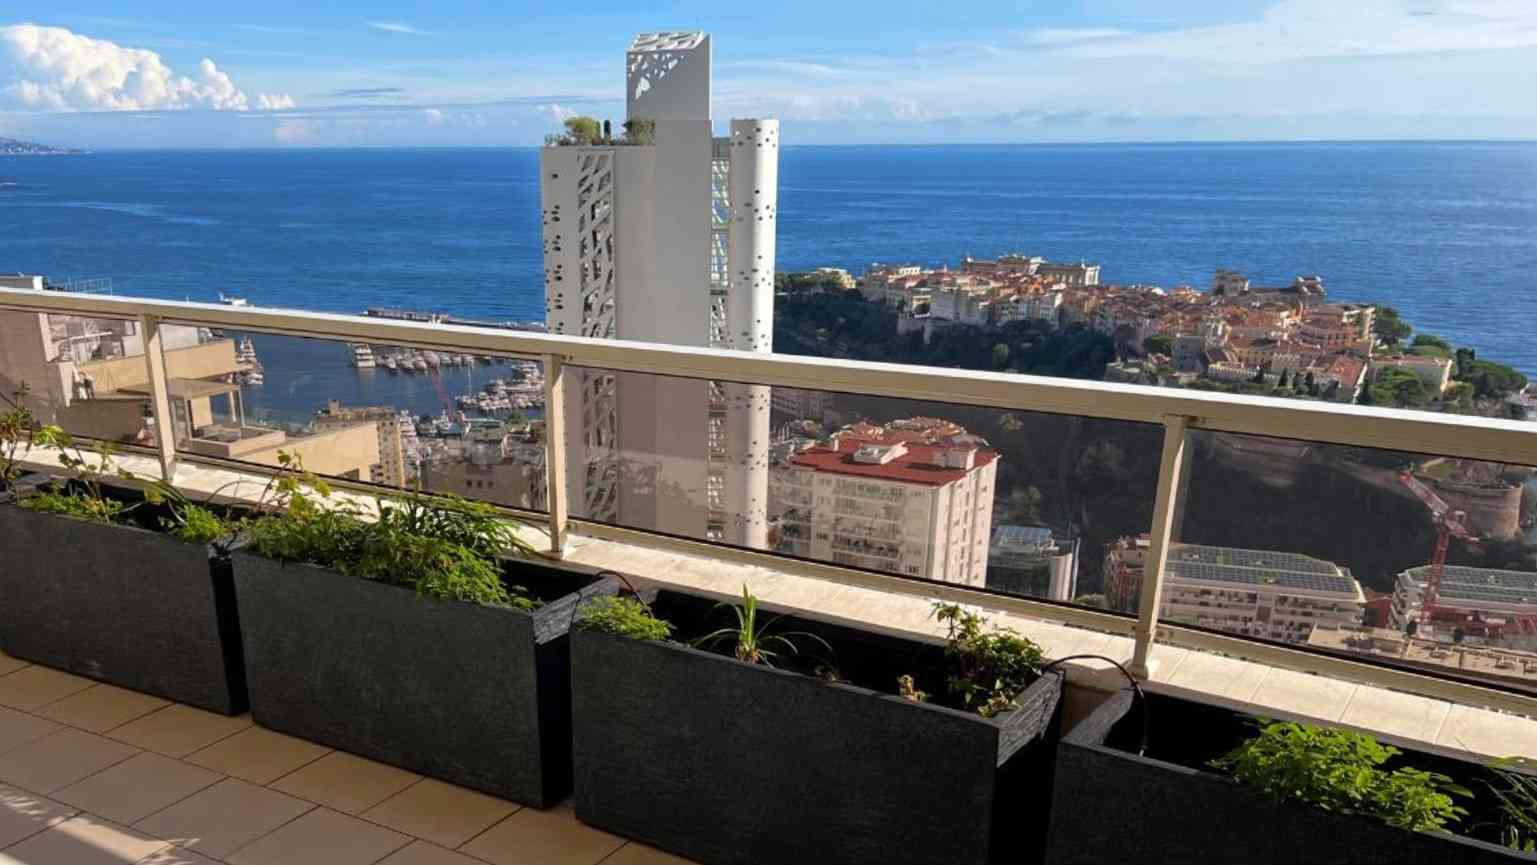                                                                                                                                         LARGE 3-4  MAIN ROOMS APARTMENT, BREATHTAKING VIEW OVER MONACO                                                                    
                                                             